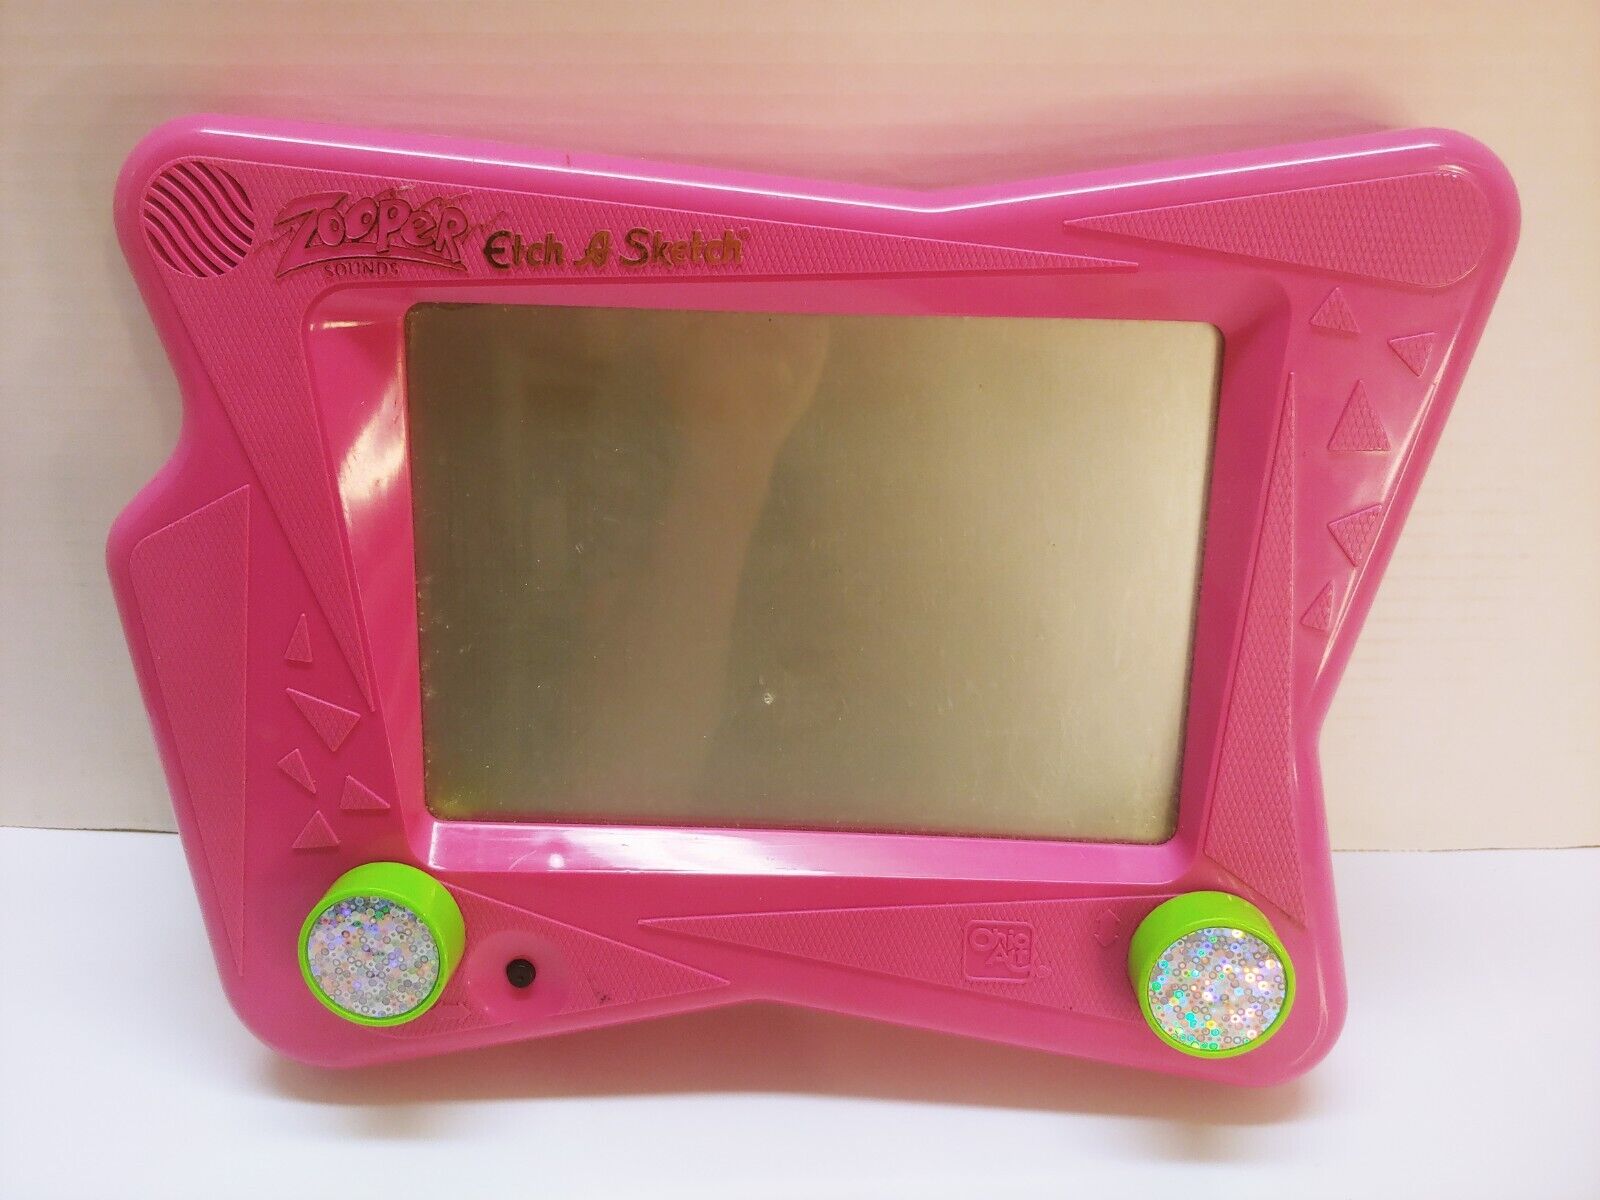 Etch-A-Sketch Zooper Sounds By Ohio Art Early 90's Rare Pink Works!